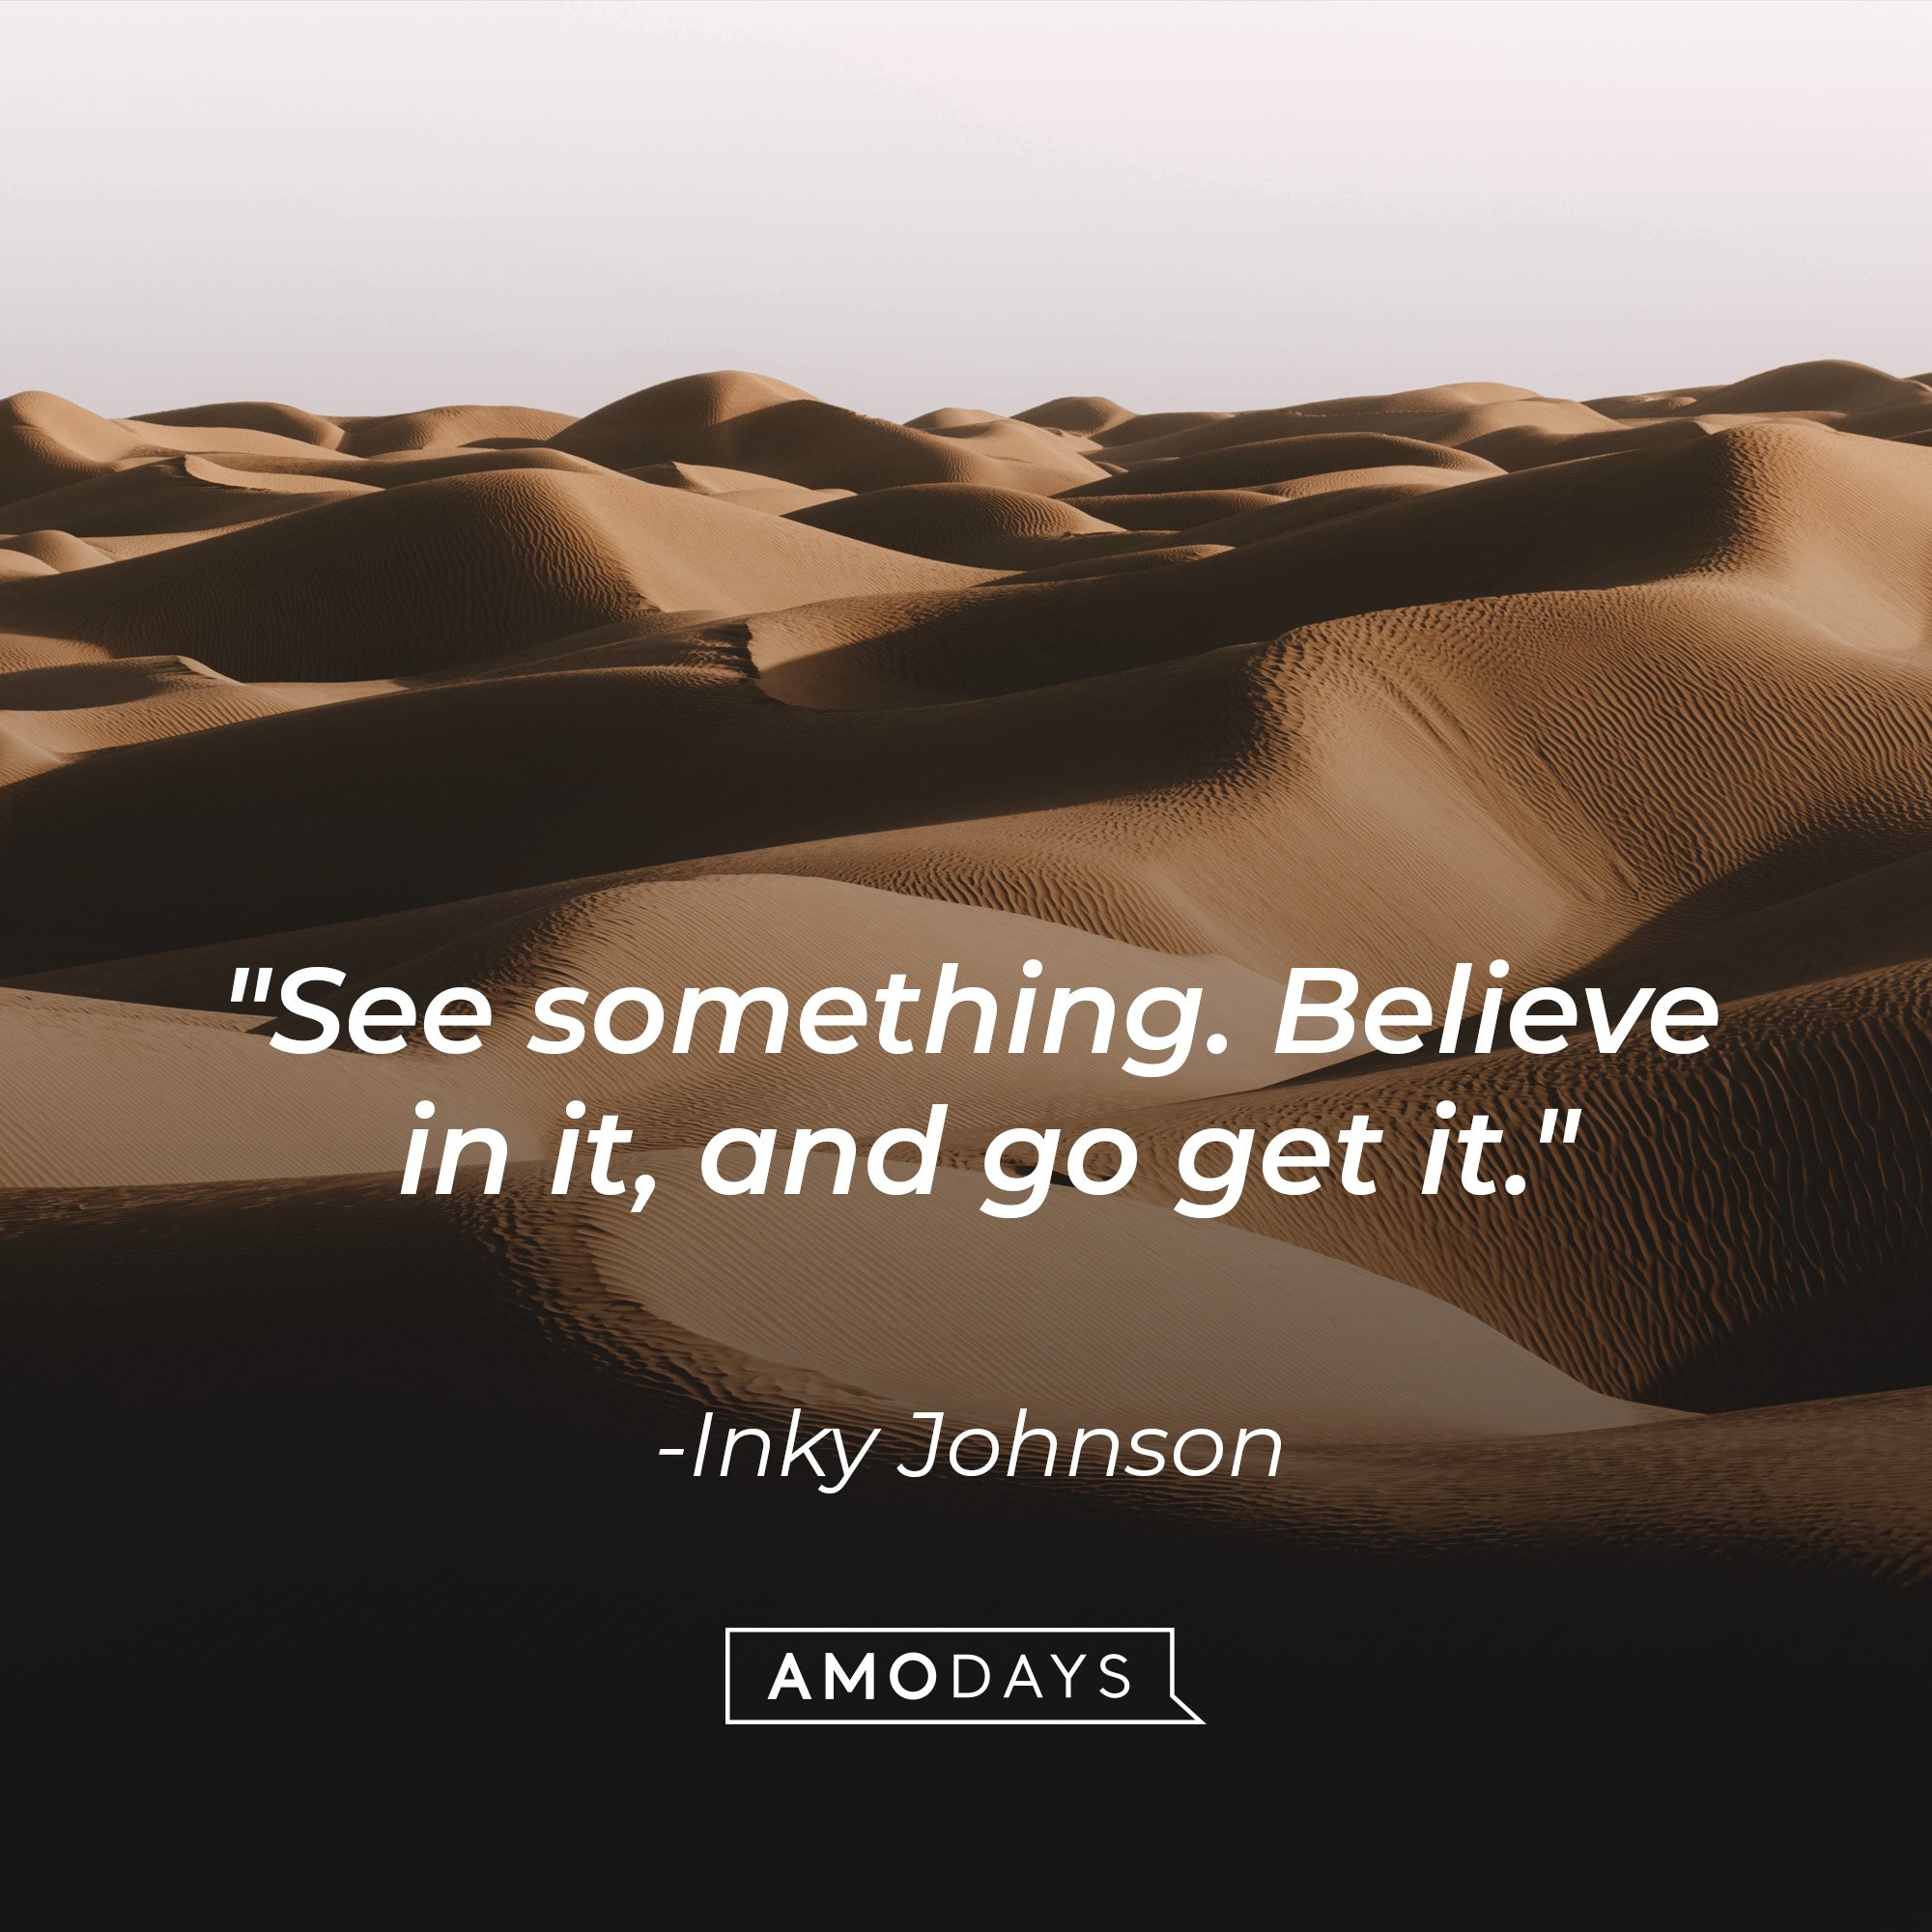 Inky Johnson's quote: "See something. Believe in it, and go get it." | Image: AmoDays